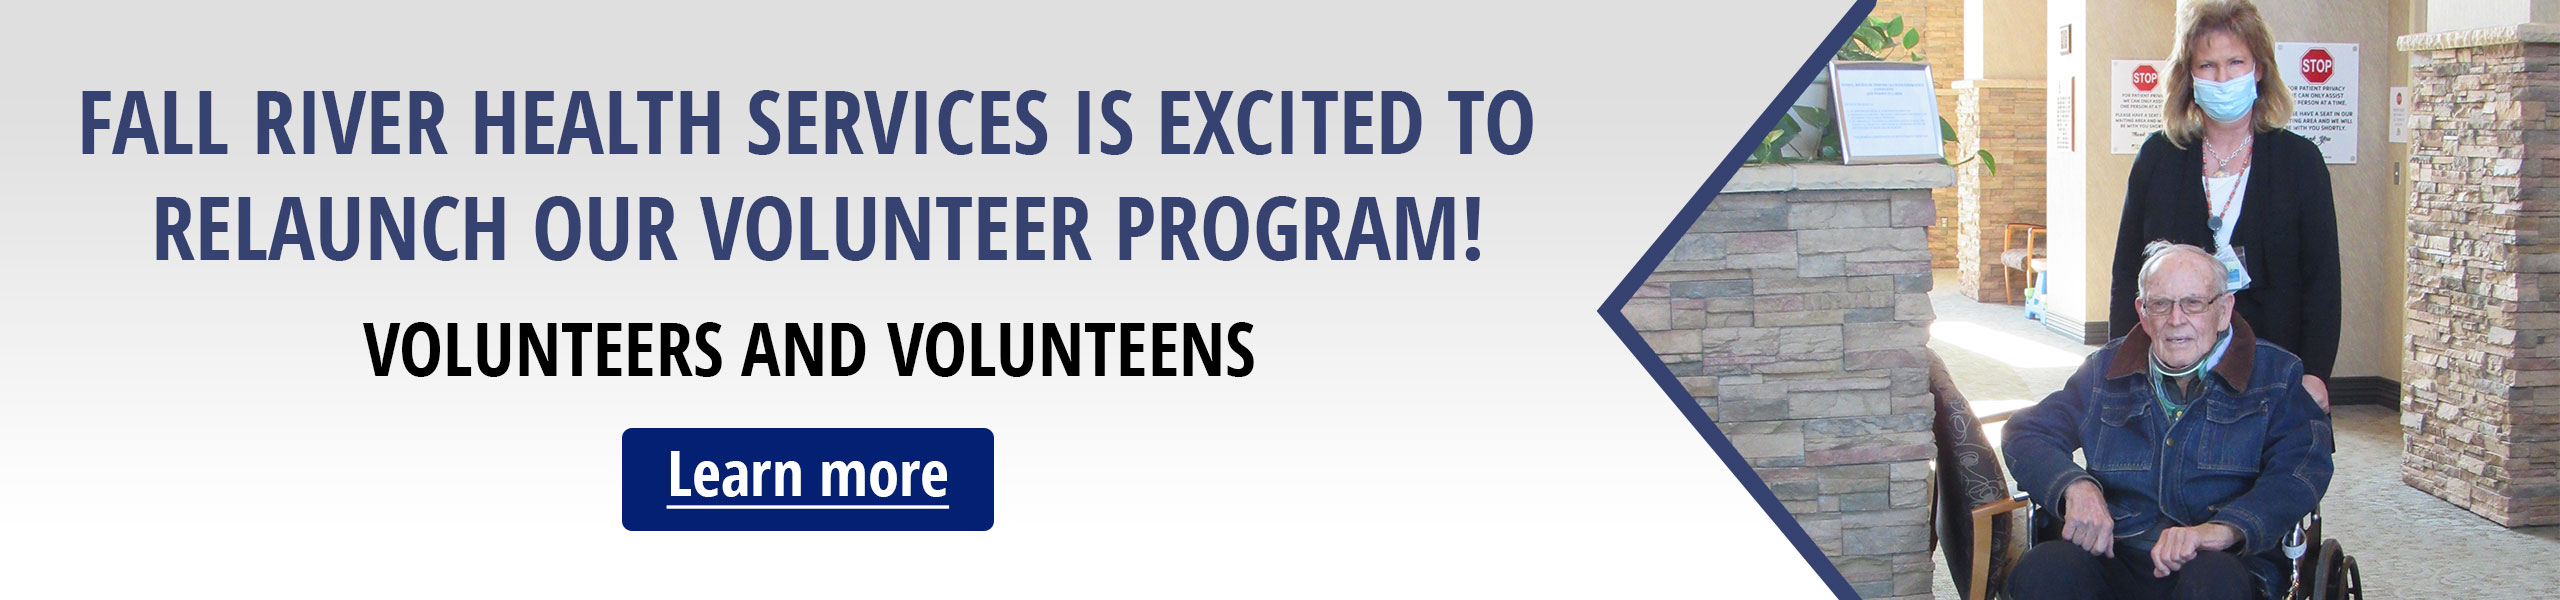 Fall River Health Services is excited to relaunch our volunteer program!

Volunteers and Volunteens

(Learn More)